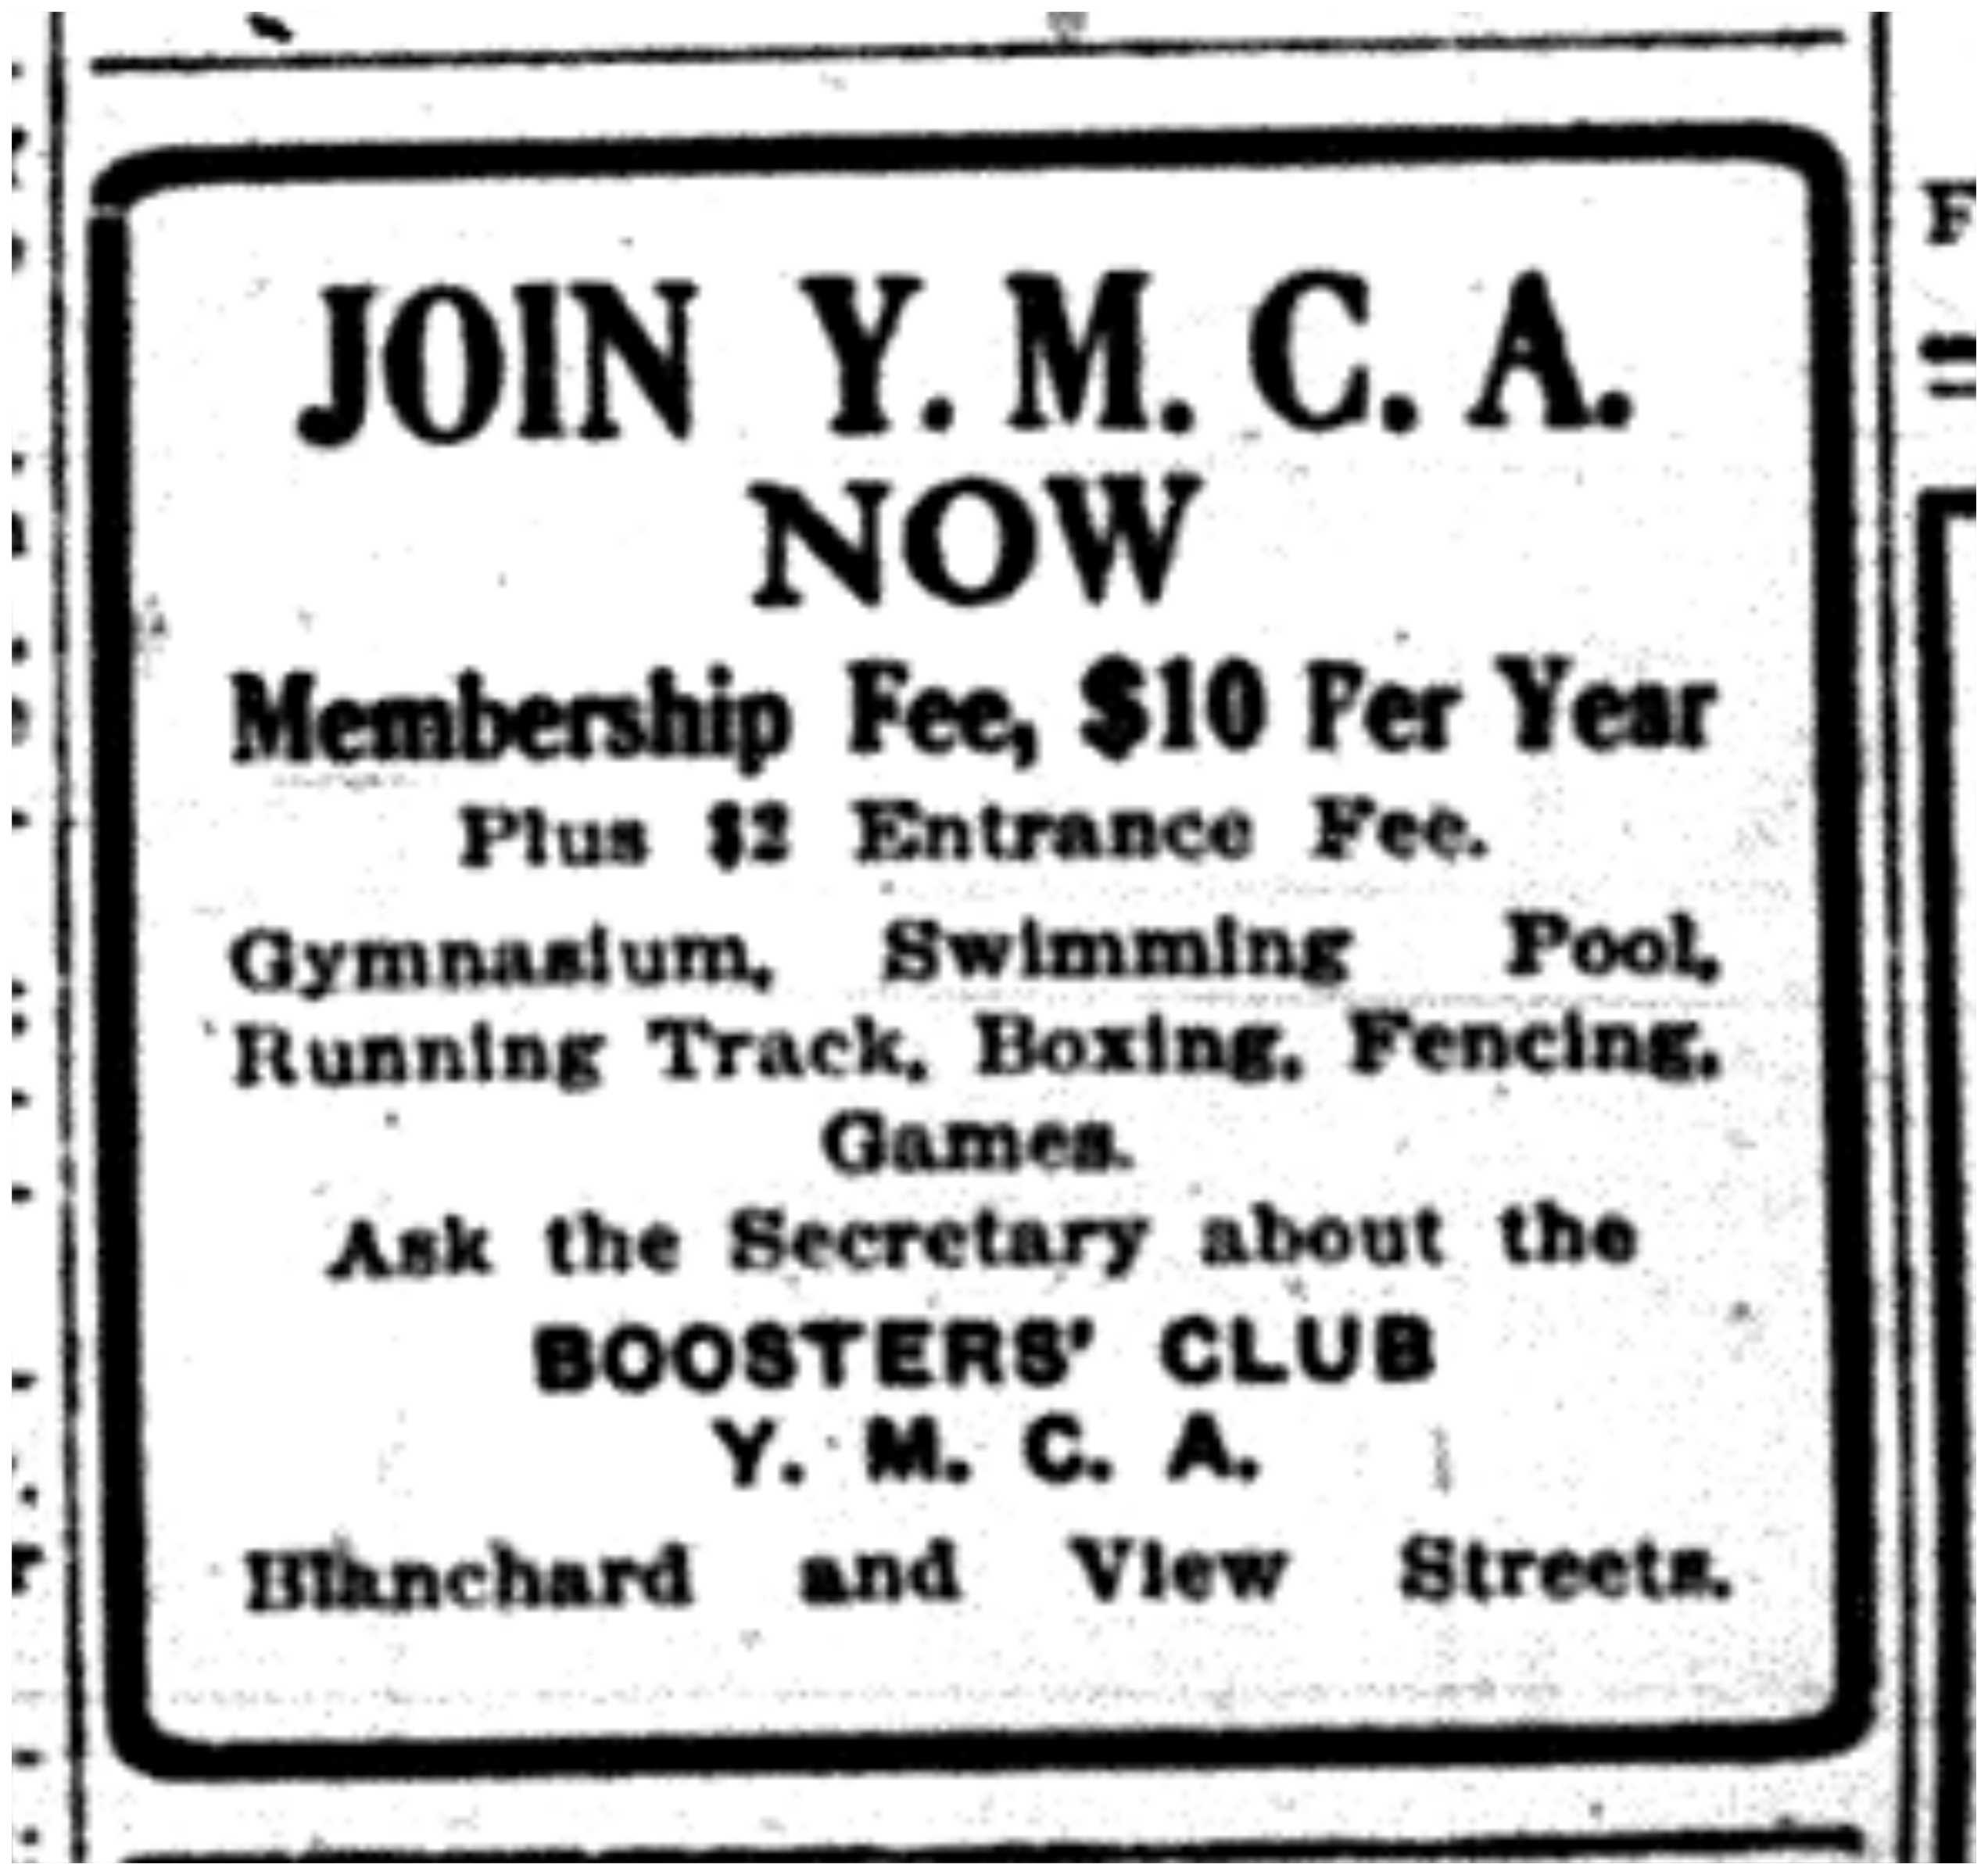 "Join Y.M.C.A. Now"